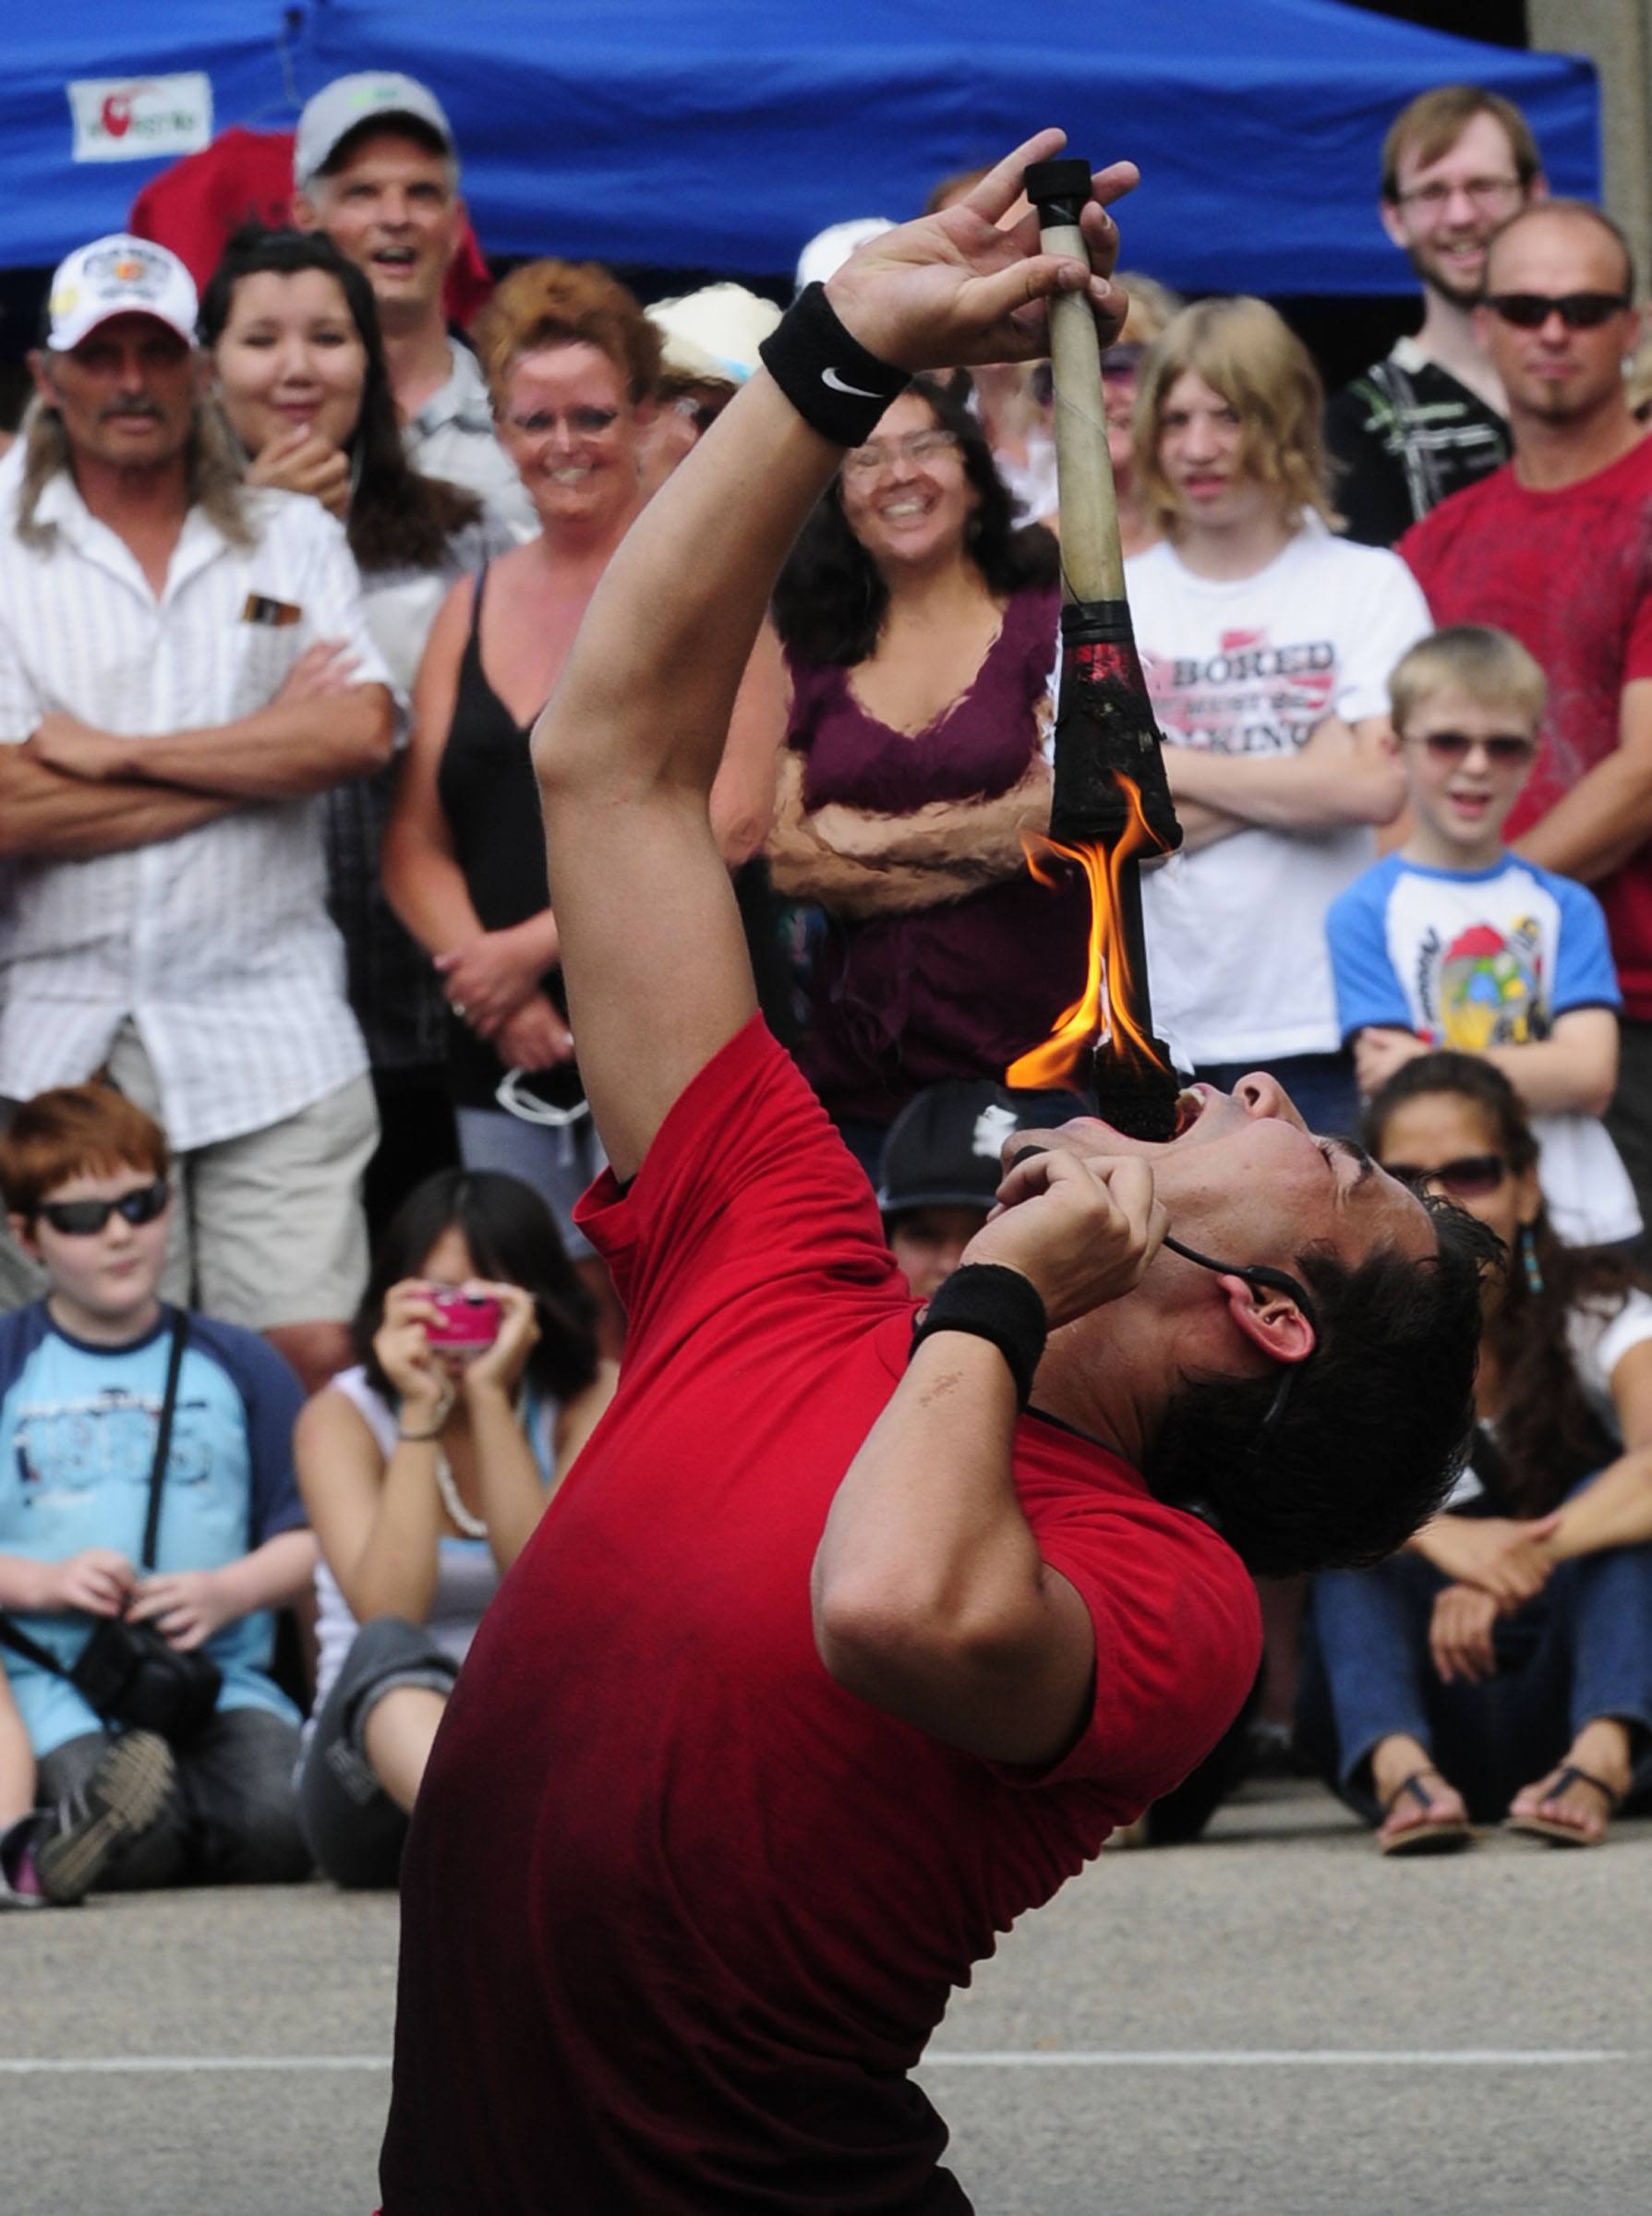 Daniel Craig of 'Street Circus' swallows a flame Sunday during CentreFest